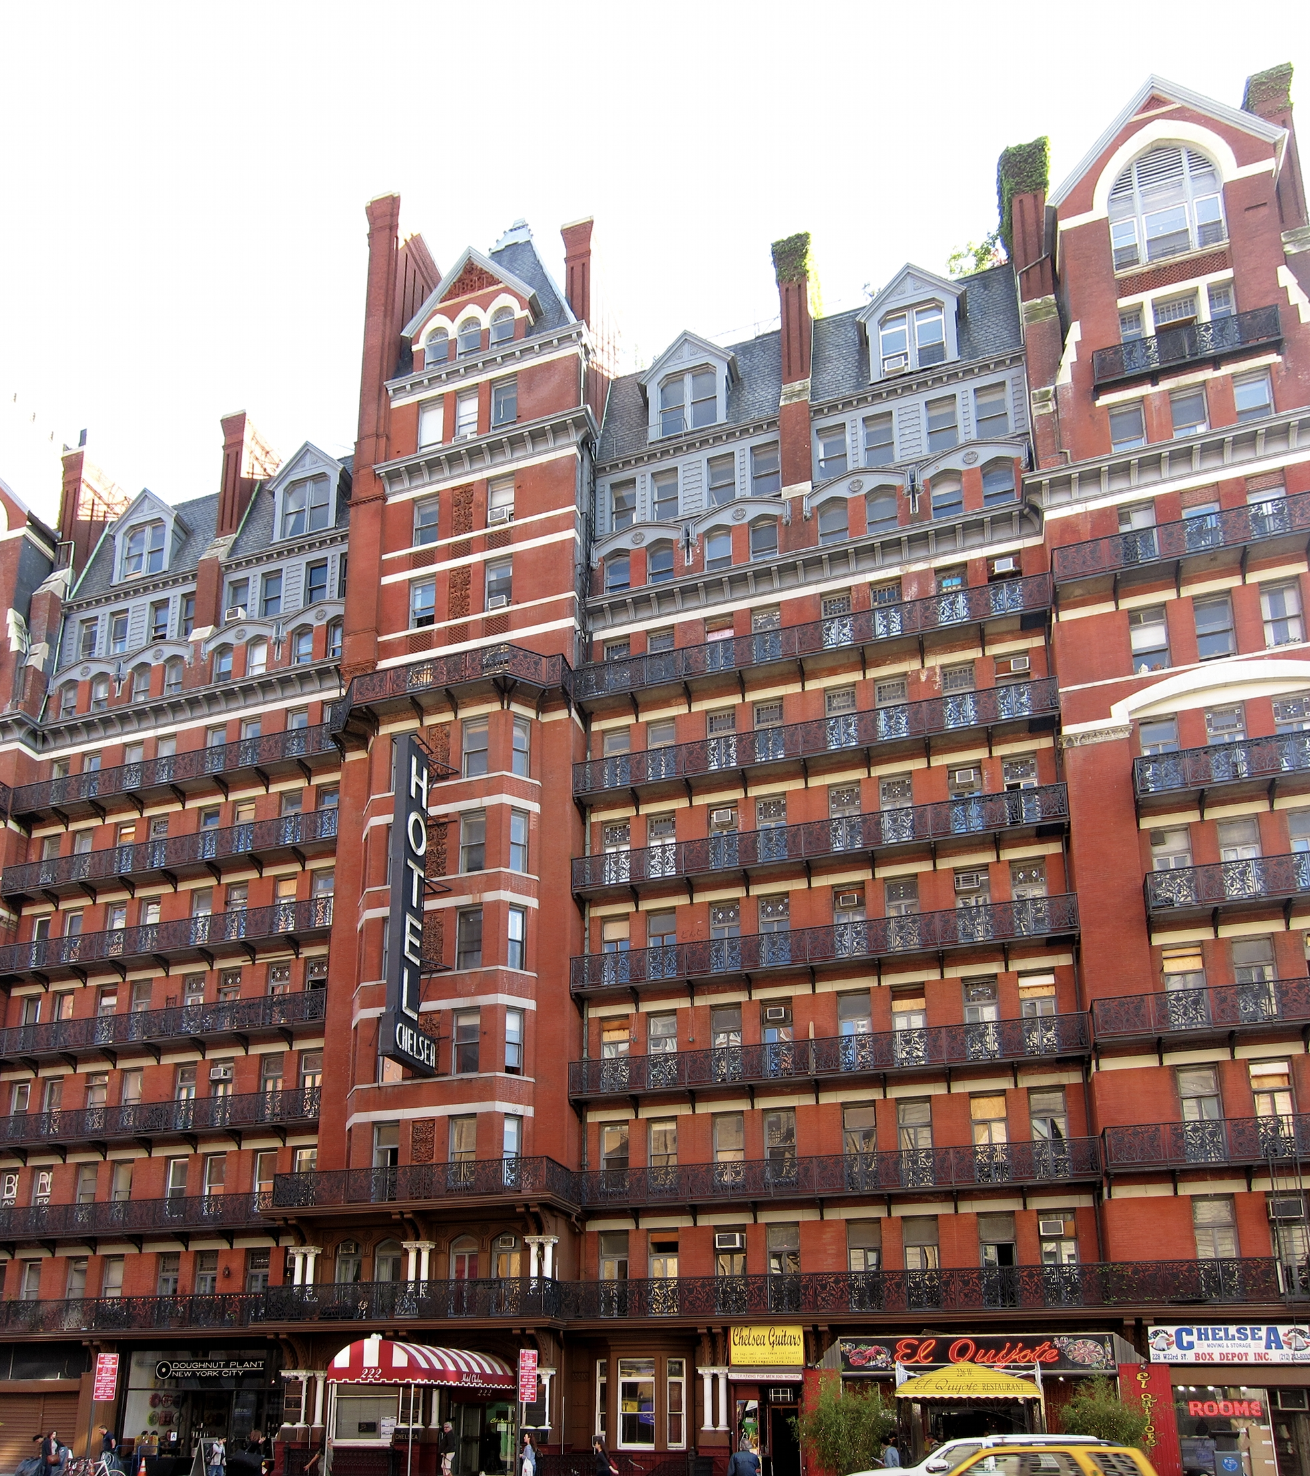 A photograph of the Chelsea Hotel in New York City, a 10-story red brick building in a multitude of archiectural styles.